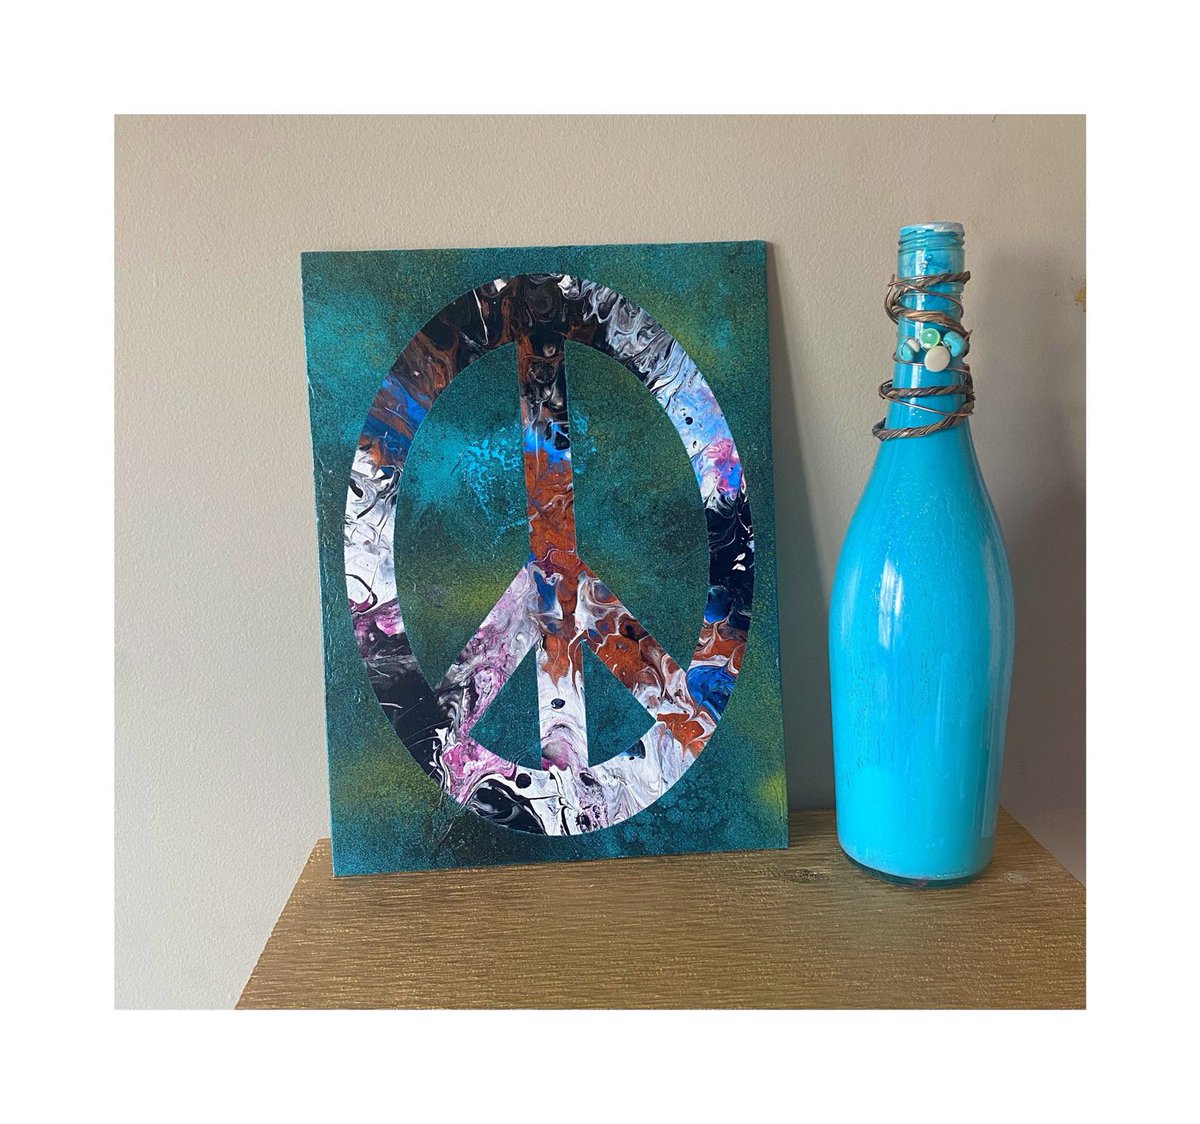 Excited to share this item from my #etsy shop: Peace Symbol Sign Wall Hanging Decor 9x12 Inches- Framed Canvas - Acrylic Pour Painting - Wall Accent - Peace sign Decor | Zen Decor #psychedelic etsy.me/3aU4wLW #rtitbot #peacesign #pourpaintings #walldecor #yogadecor